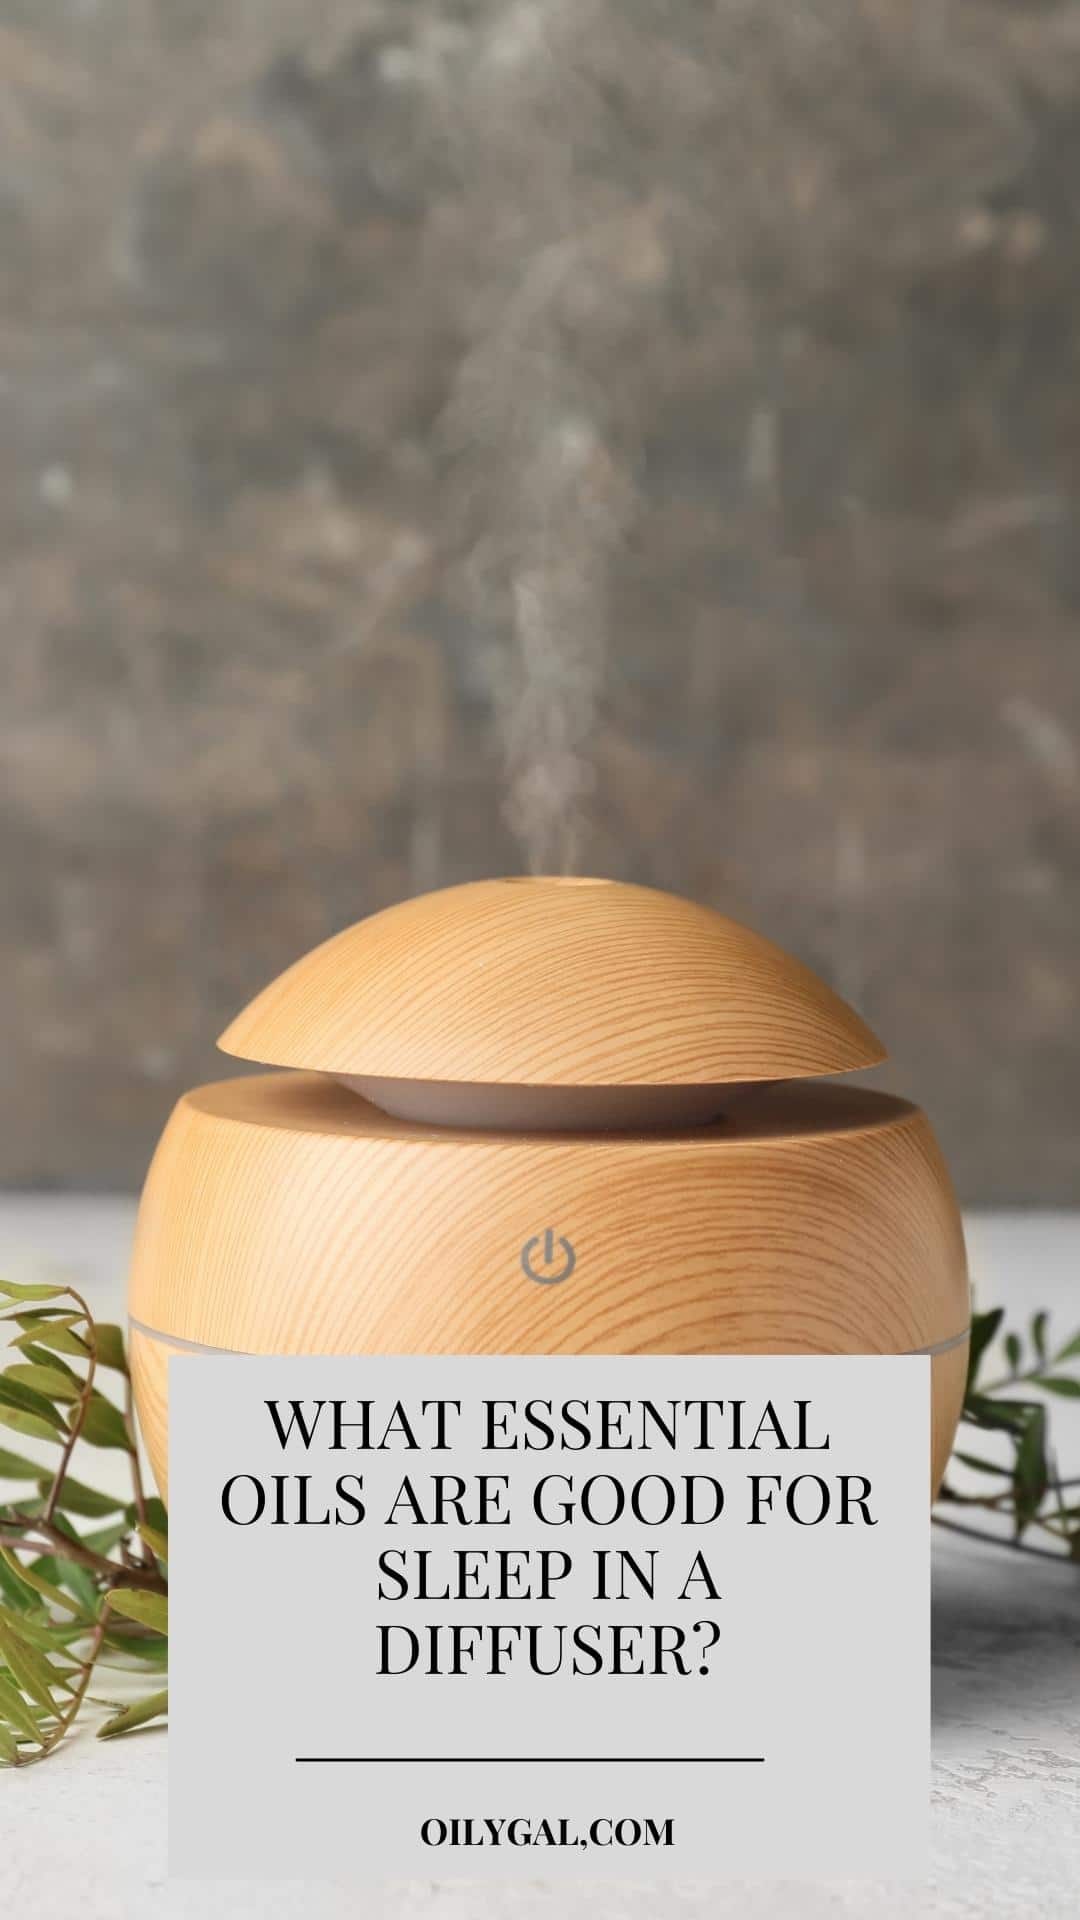 What Essential Oils are Good for Sleep in a Diffuser